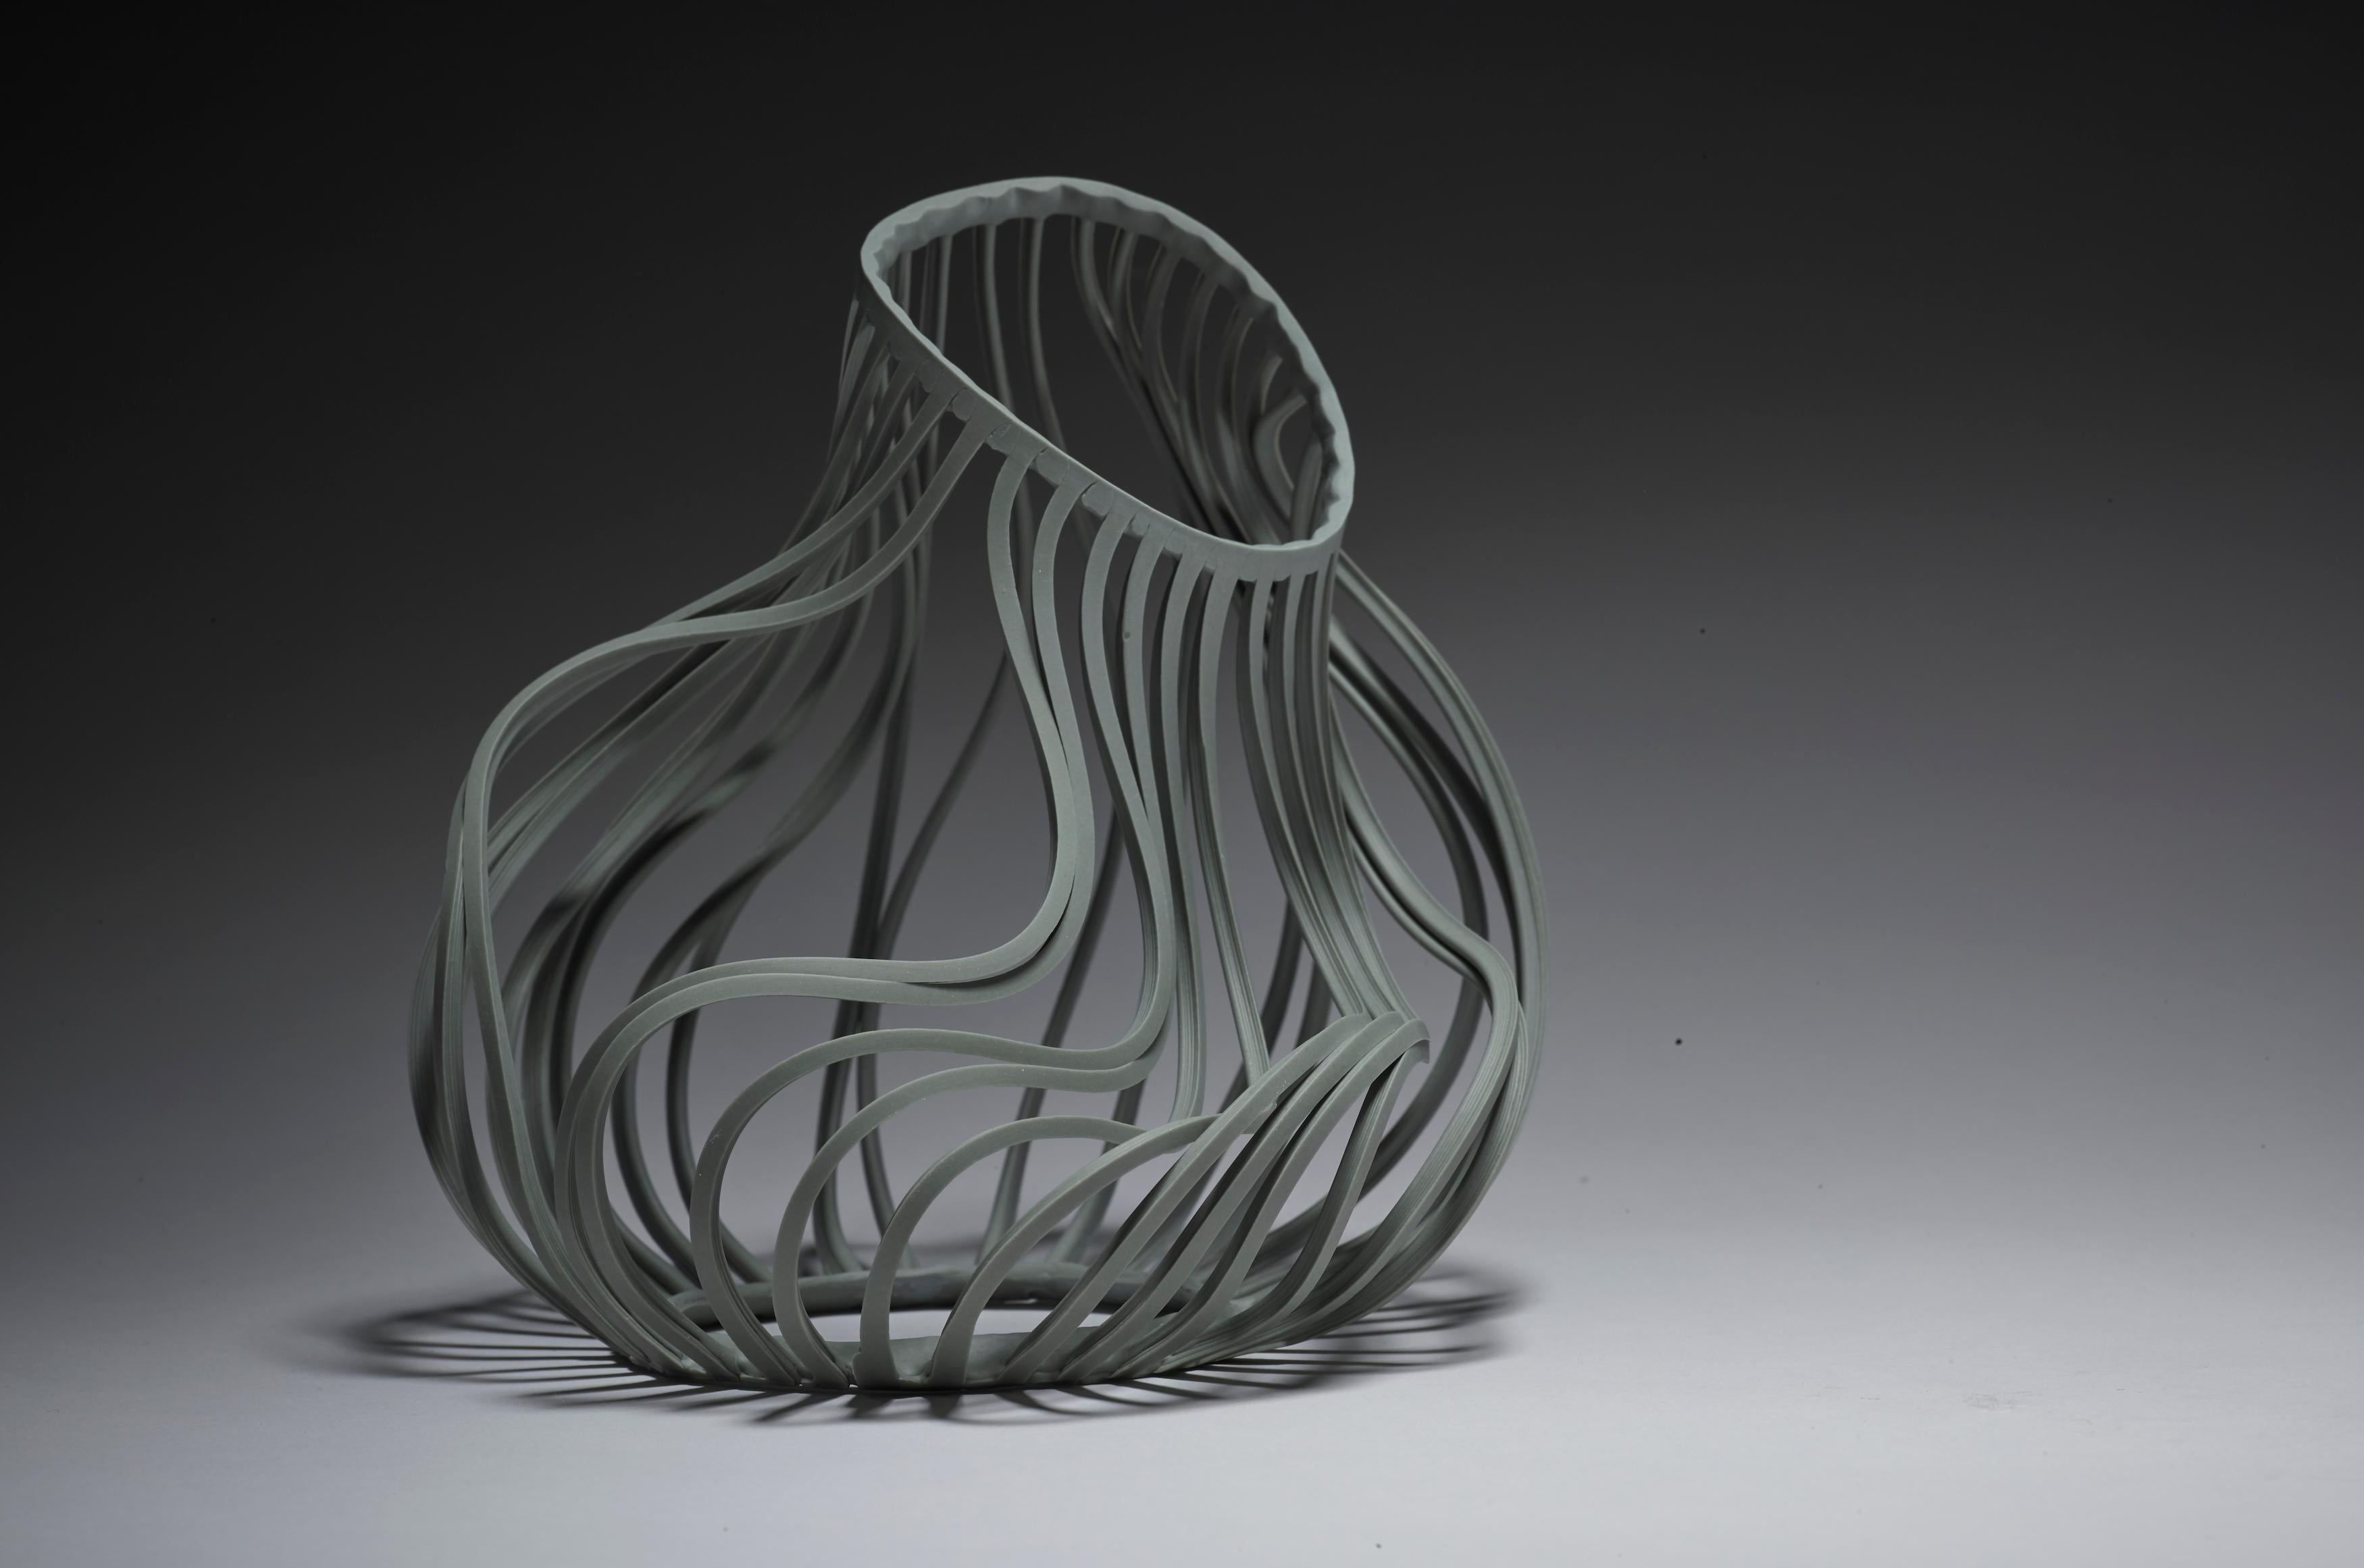 Bio: 
Ceramicist Lauren Nauman graduated from the Royal College of Art with a Masters in Ceramics & Glass. The traditional technique of slip casting is central to her practice, and the process of mold making and casting with clay informs her